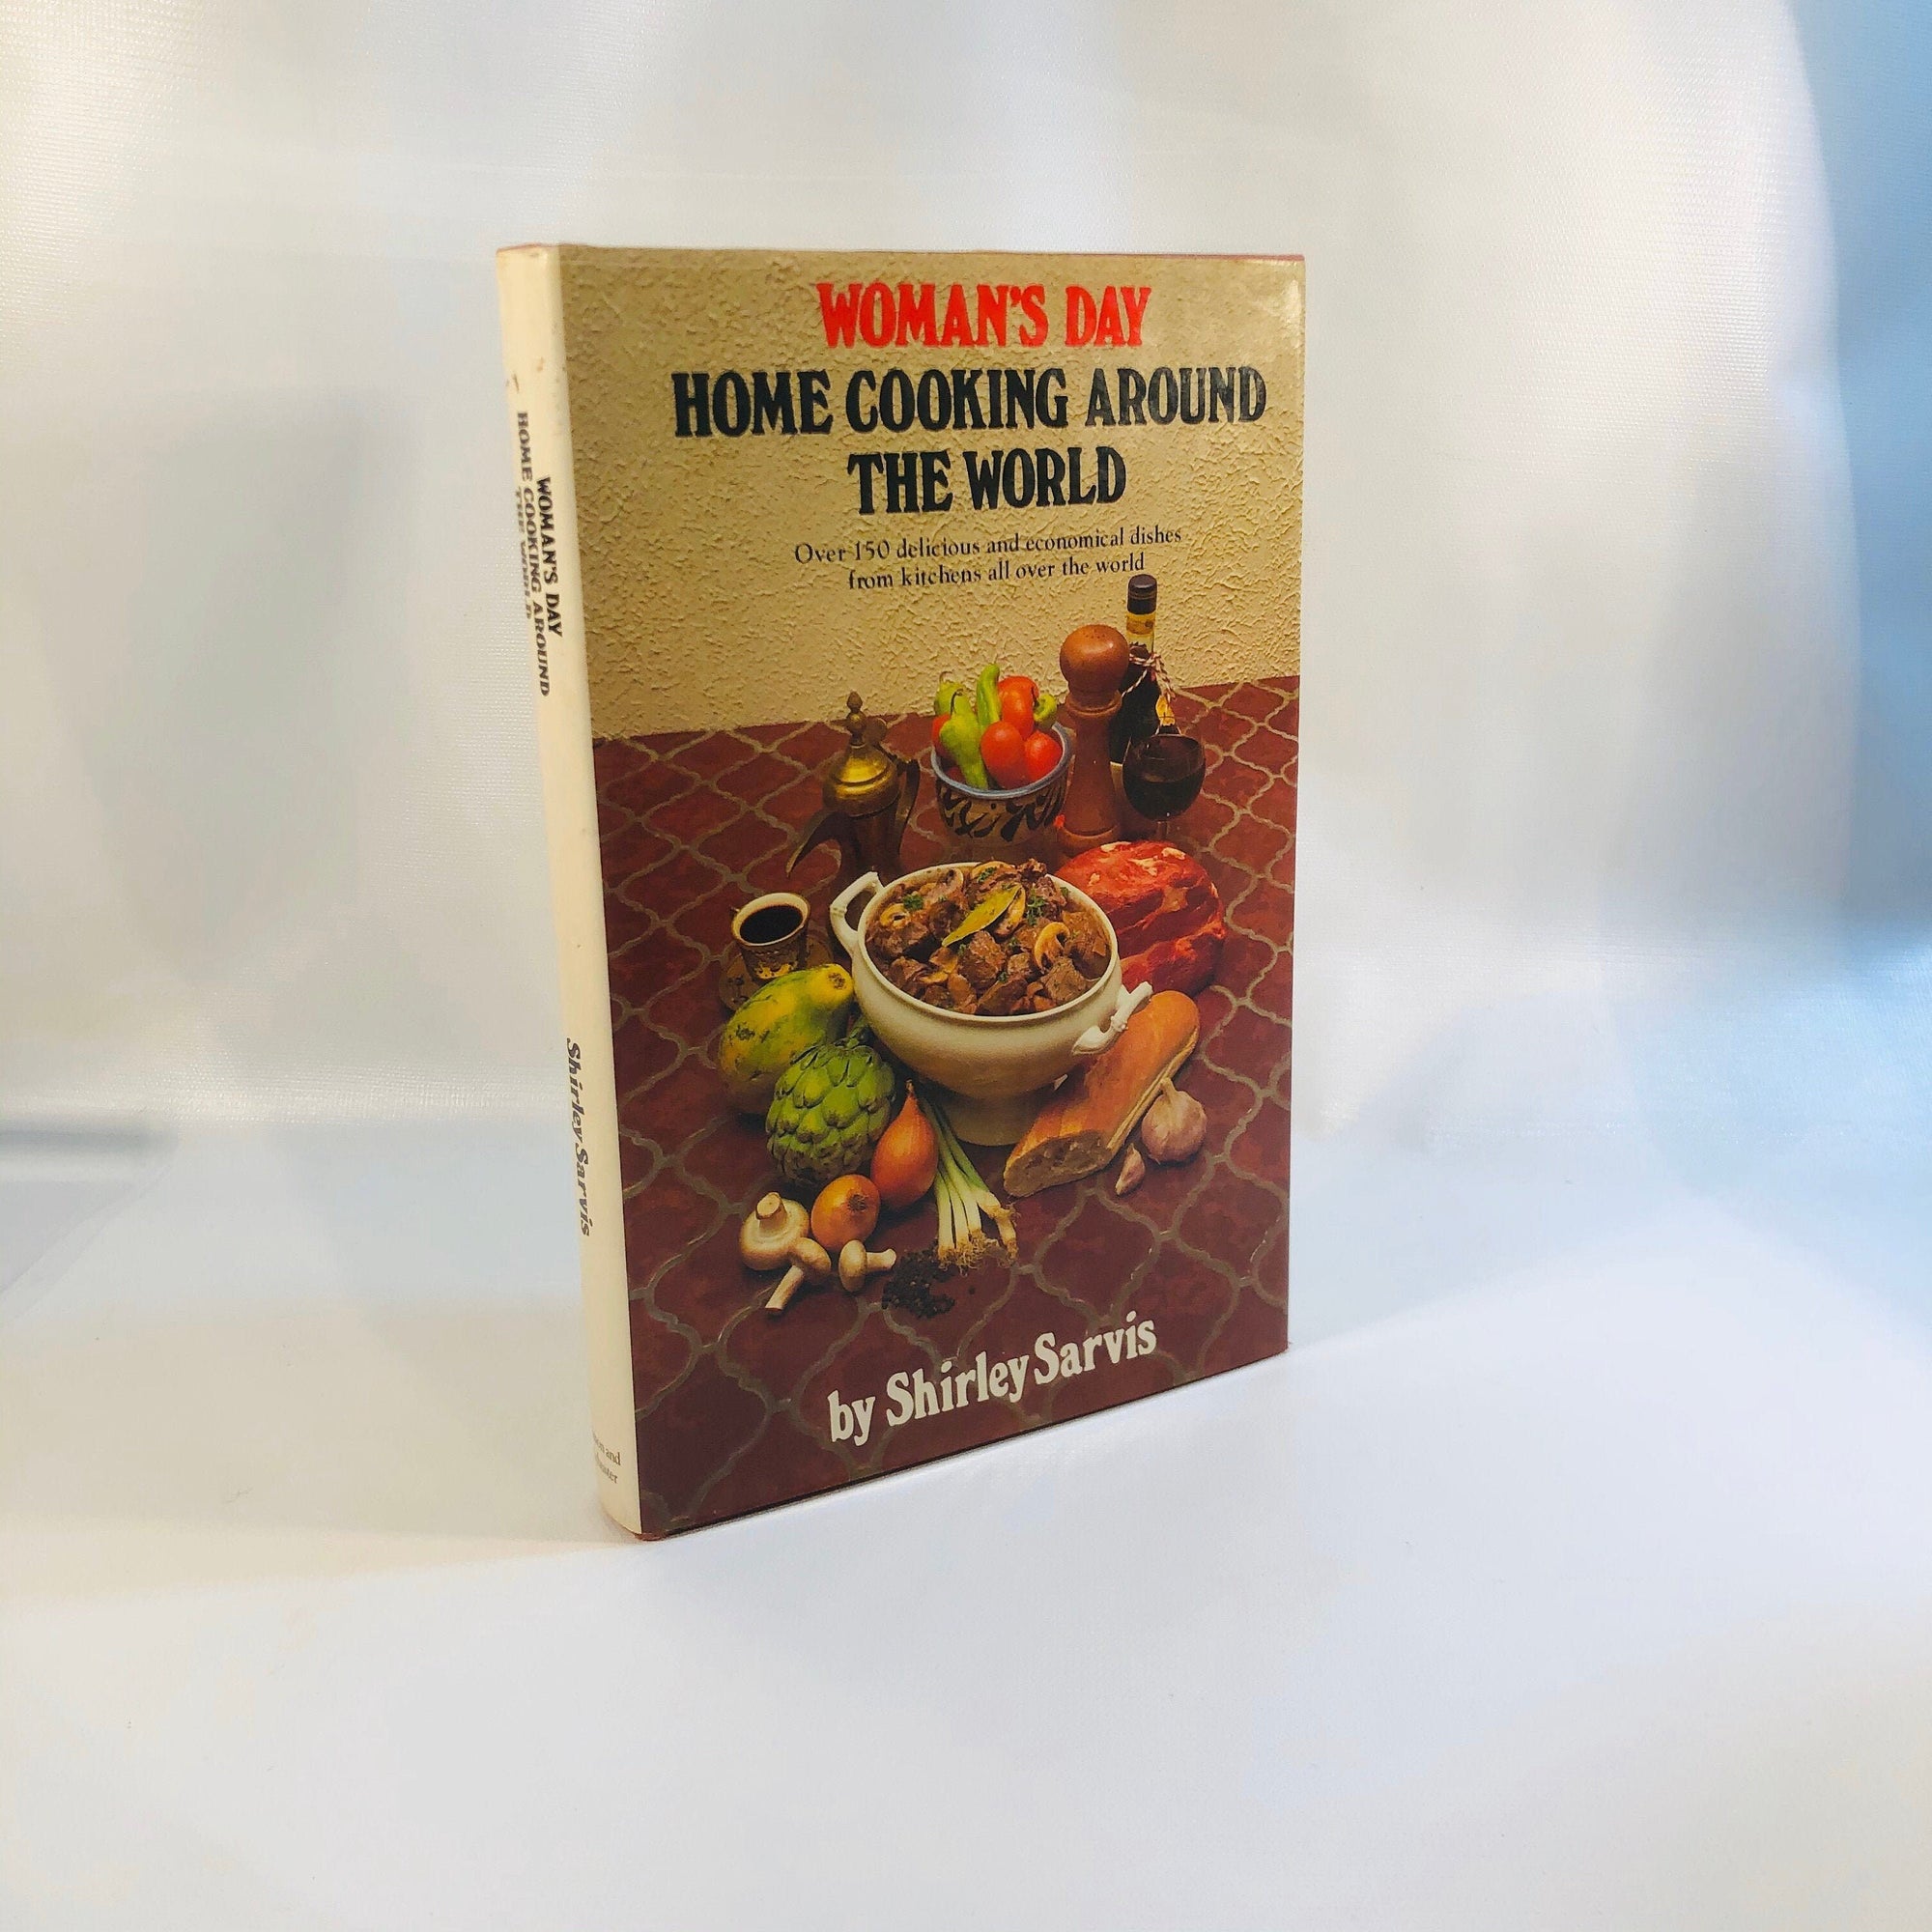 Woman's Day Home Cooking Around the World by Shirley Sarvis 1978 Vintage Book